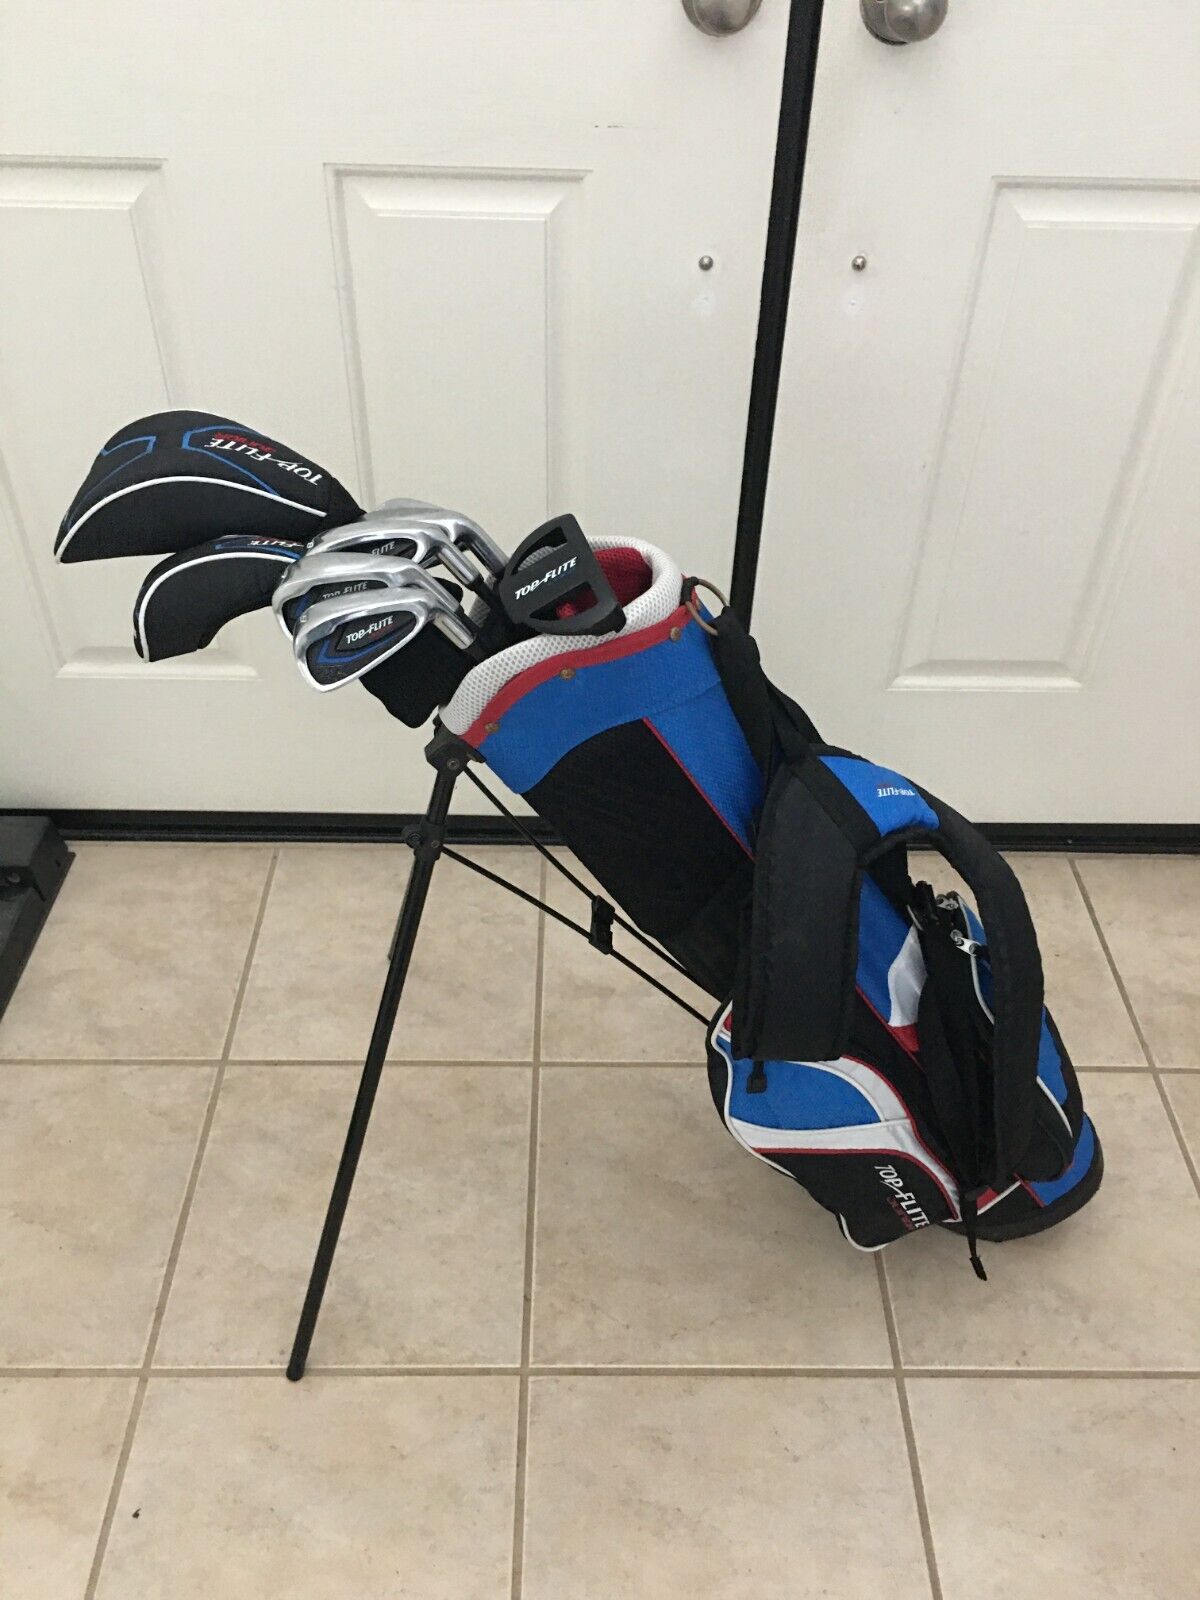 TOP FLIGHT JUNIOR FLEX 8 GOLF CLUB SET WITH DUAL STRAP STAND BAG RIGHT HANDED